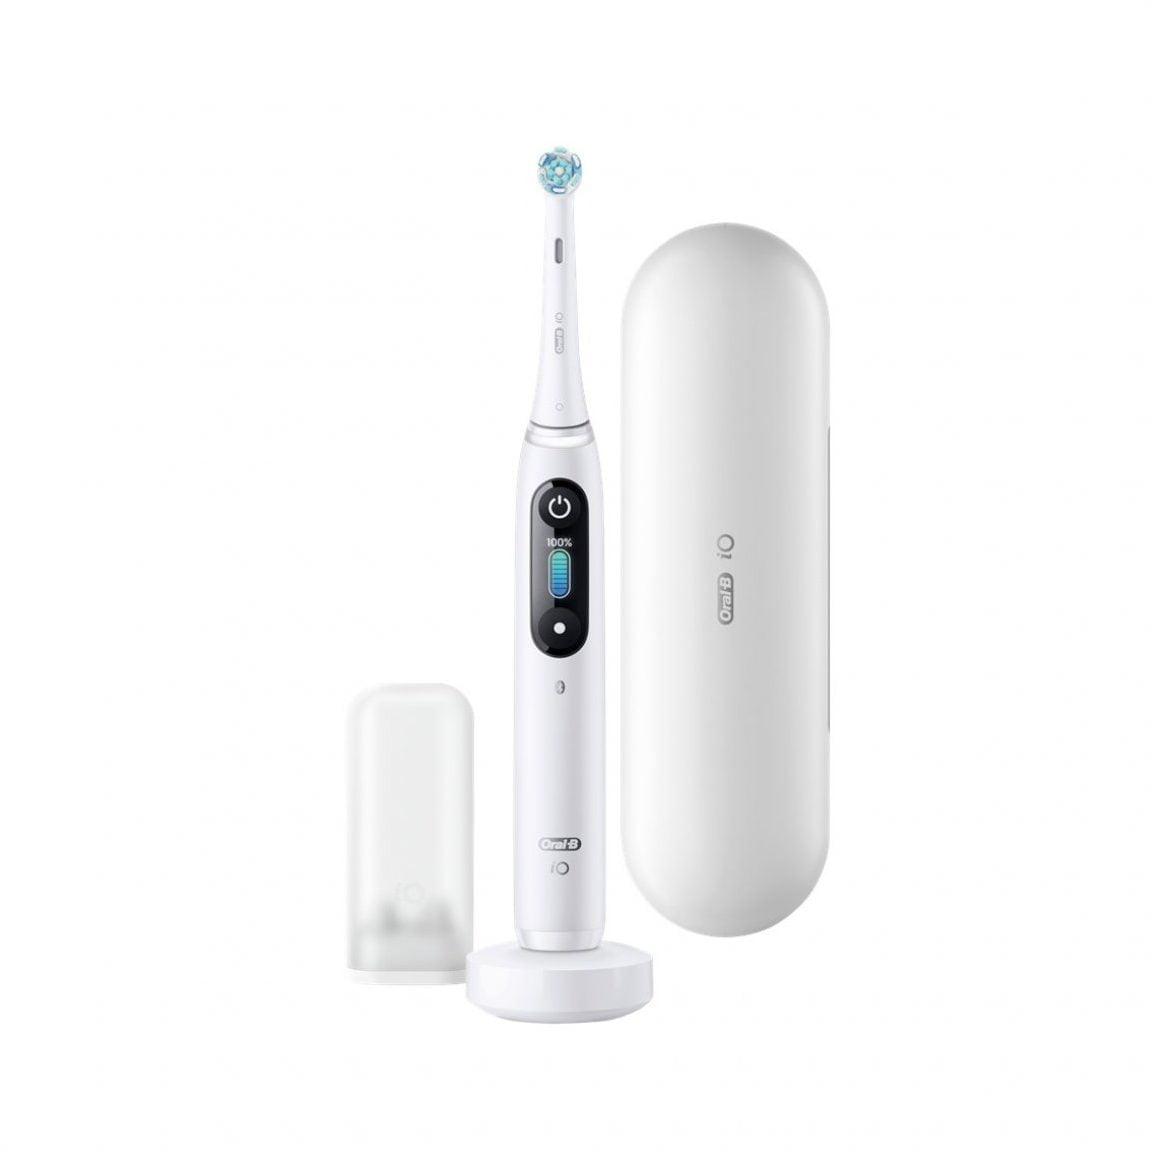 Burst oral care: Dental care company that sells electric toothbrushes, toothpastes, and floss.